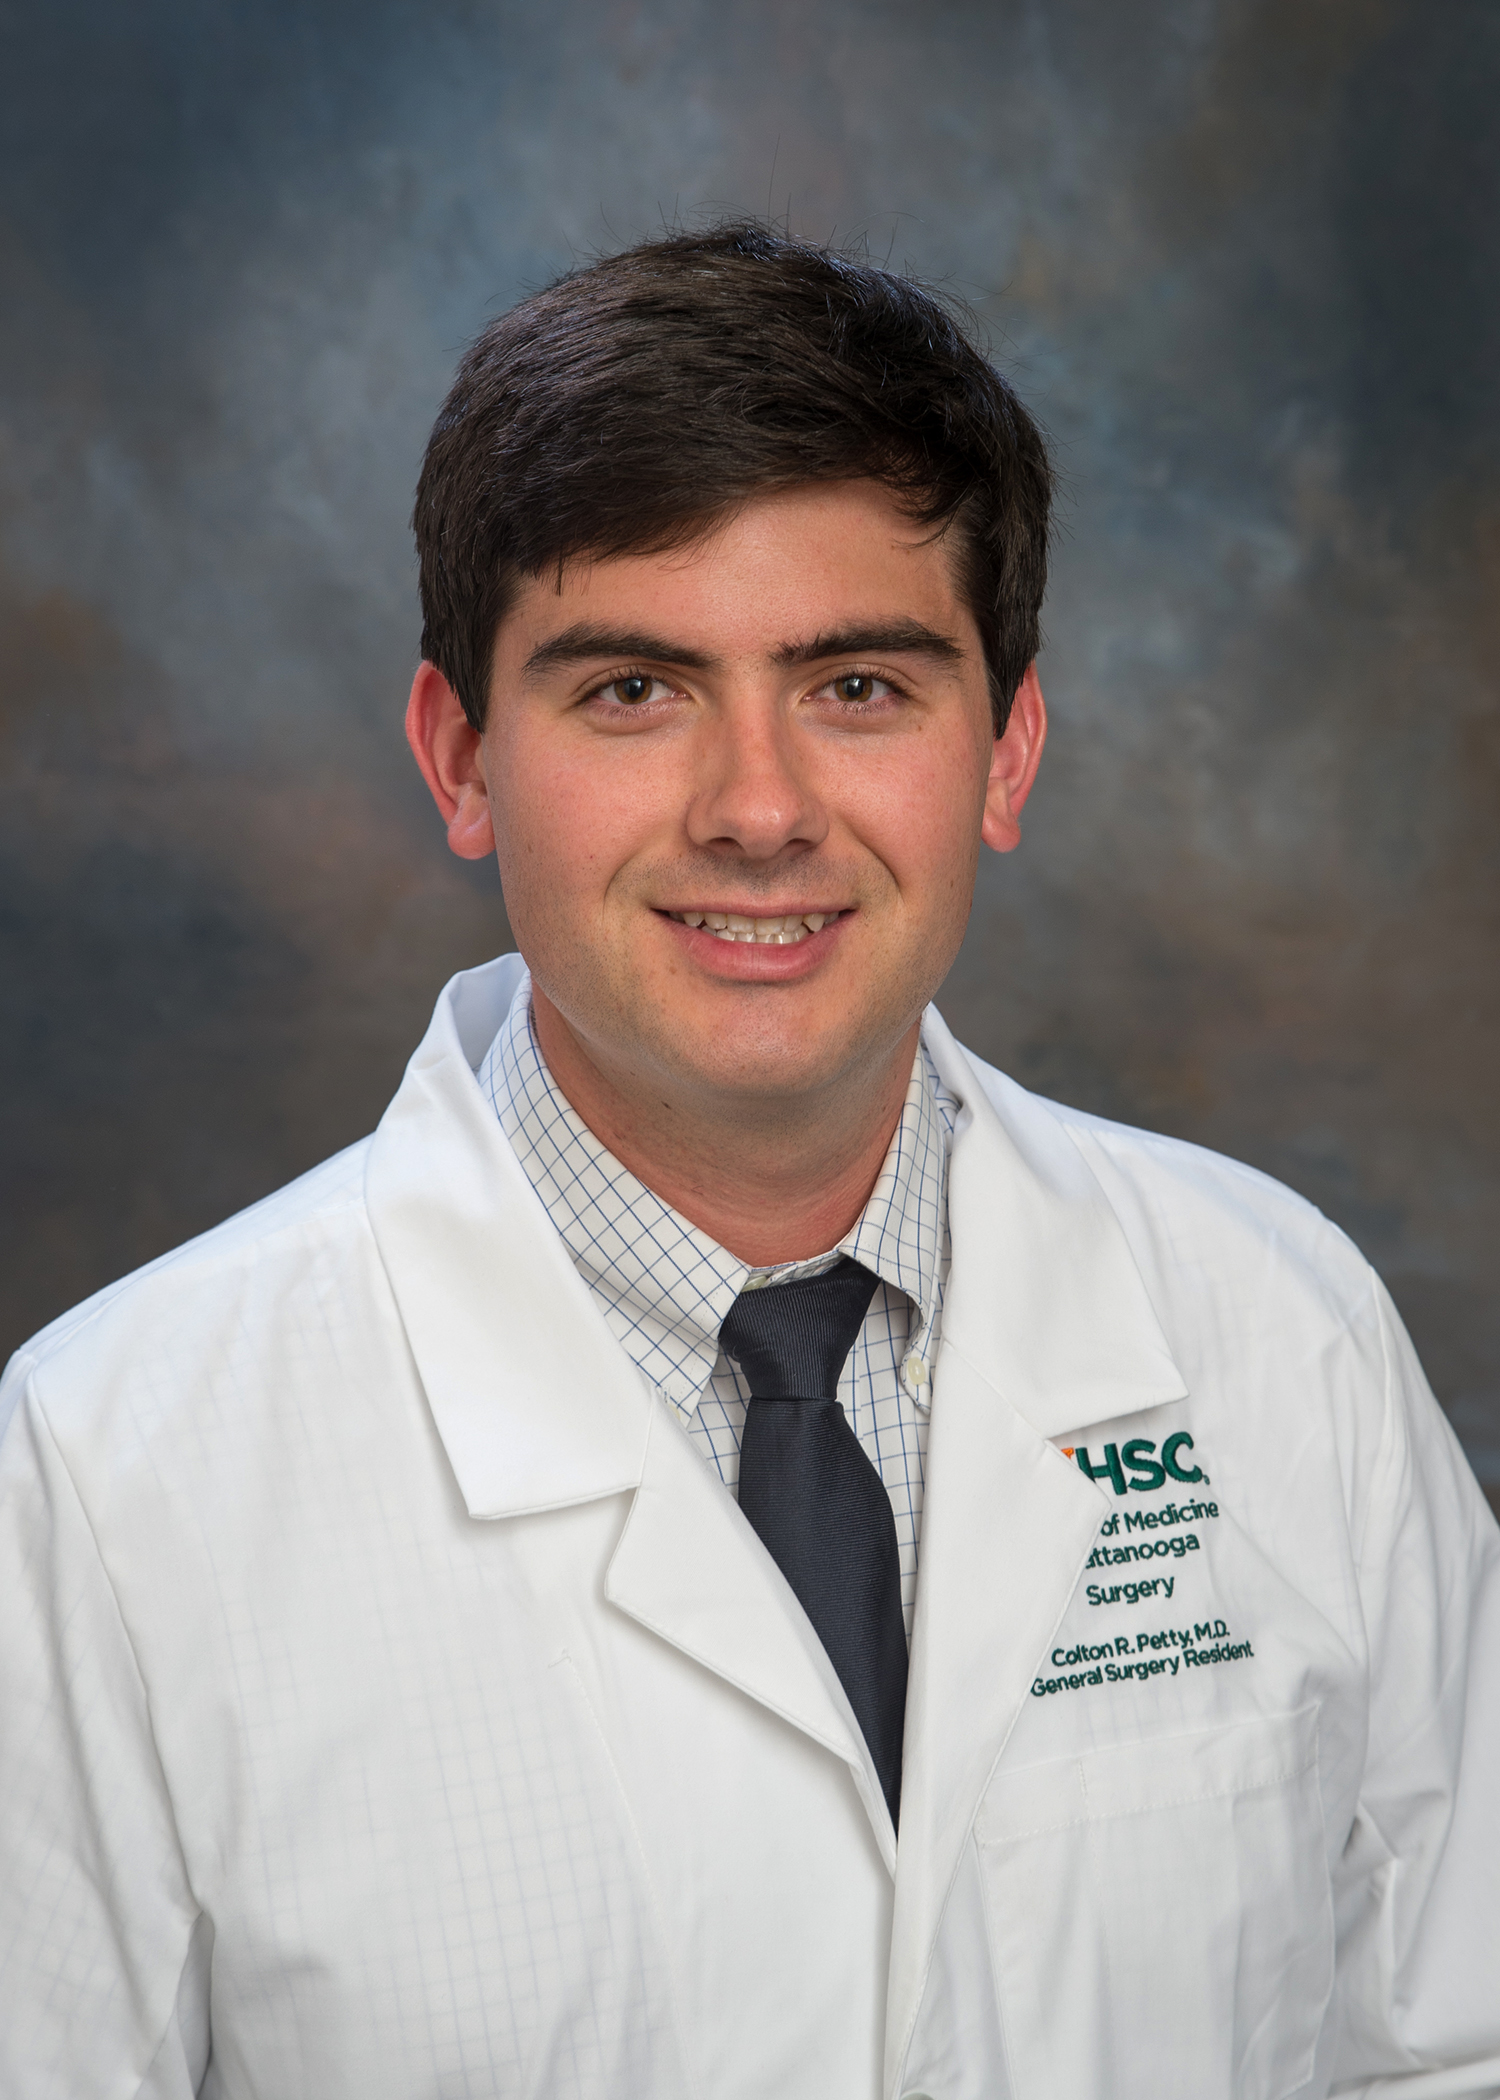 Colton Petty, MD, PGY-1 Preliminary Surgery Resident